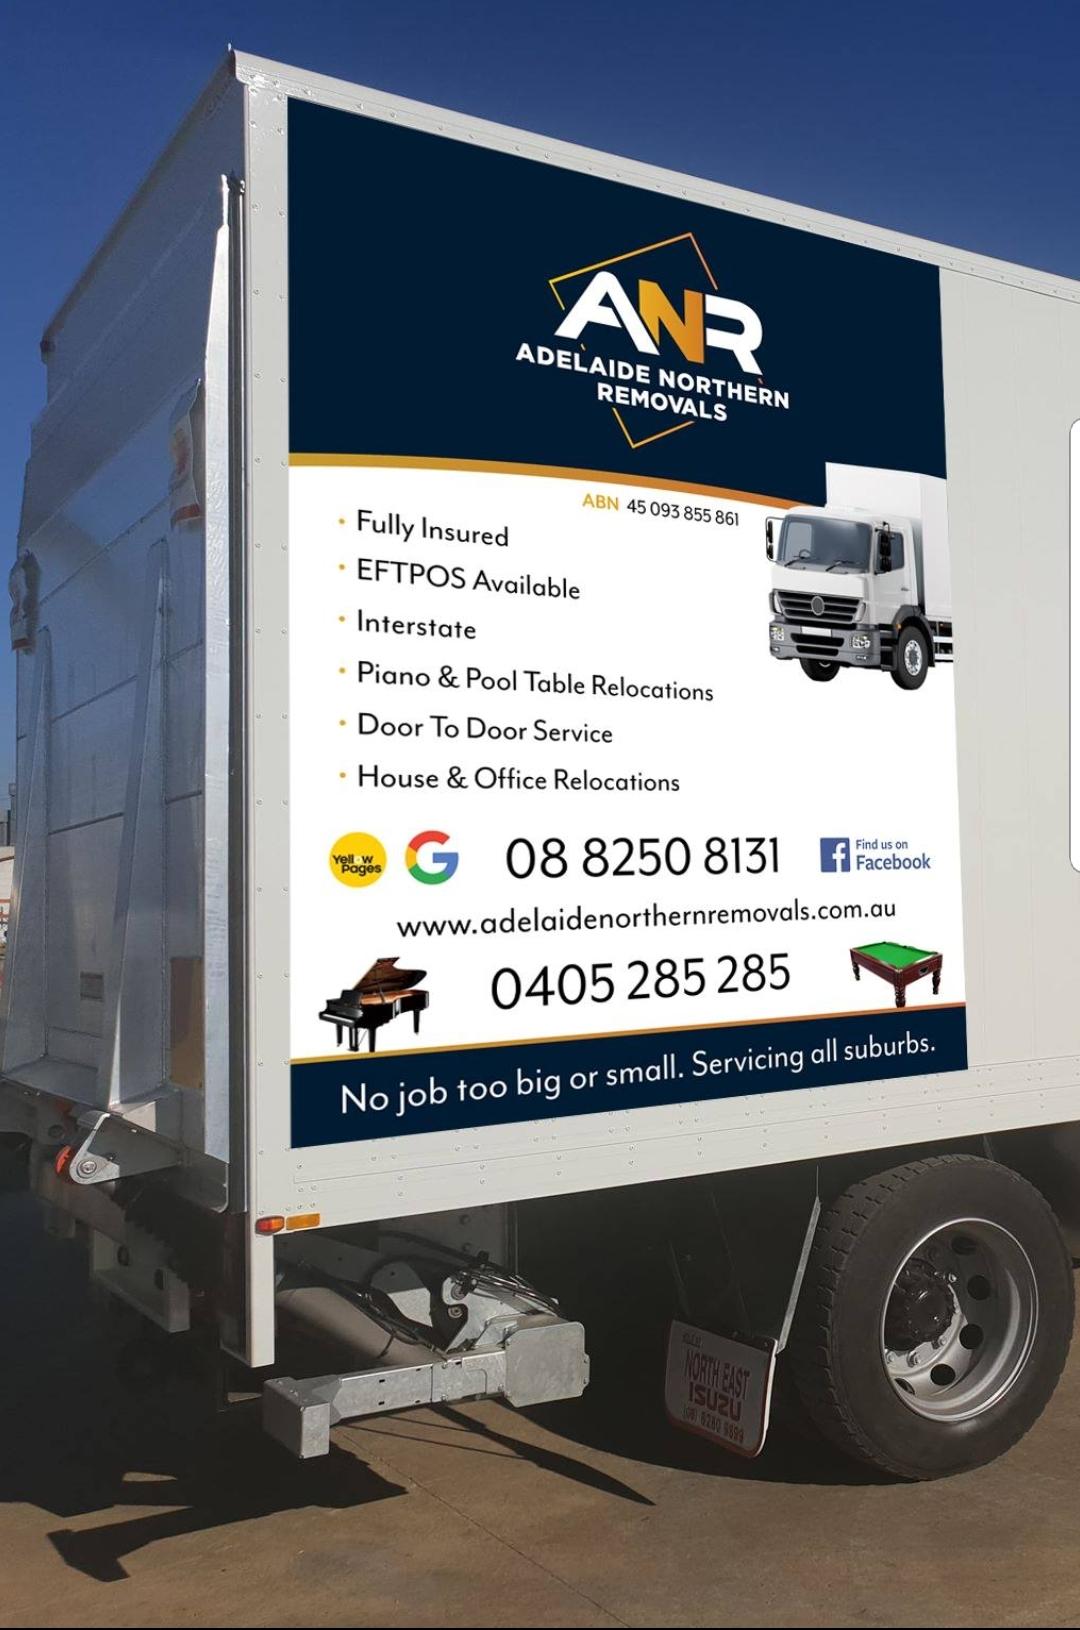 ANR Truck